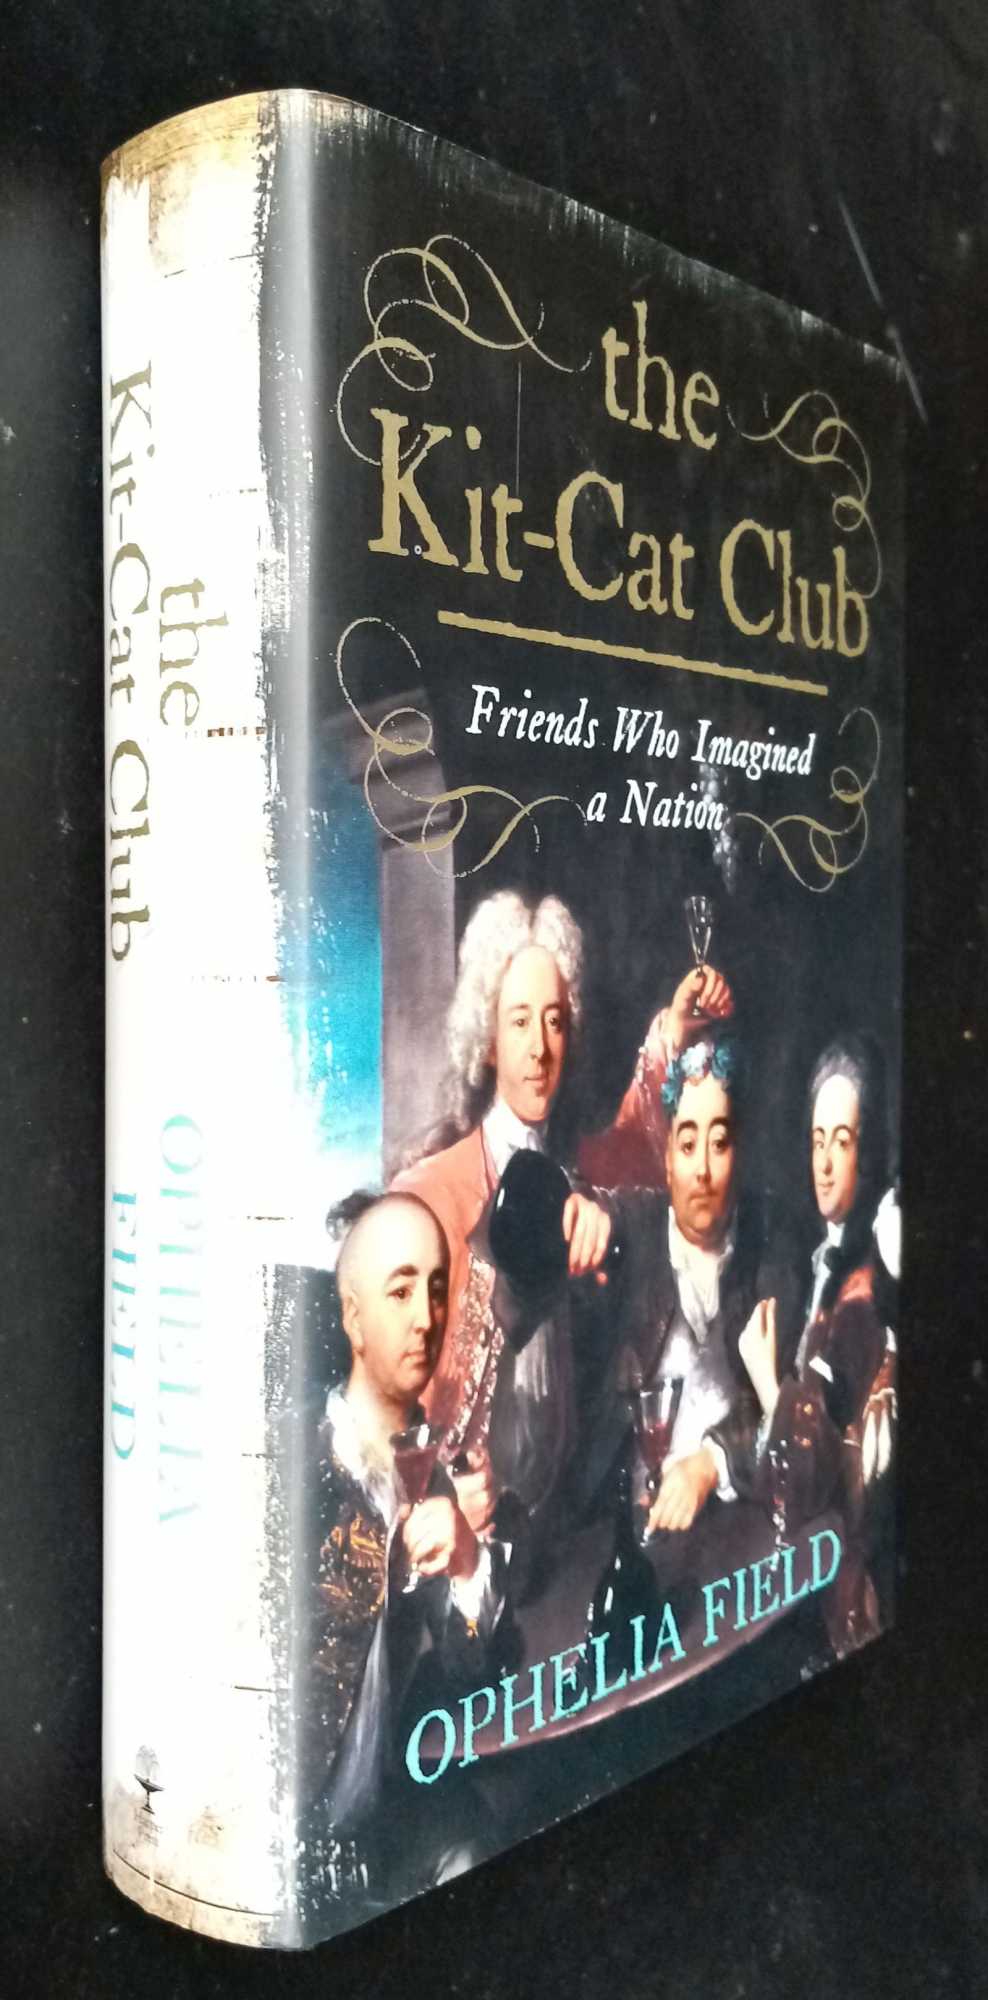 Ophelia Field - The Kit-Cat Club: Friends Who Imagined a Nation